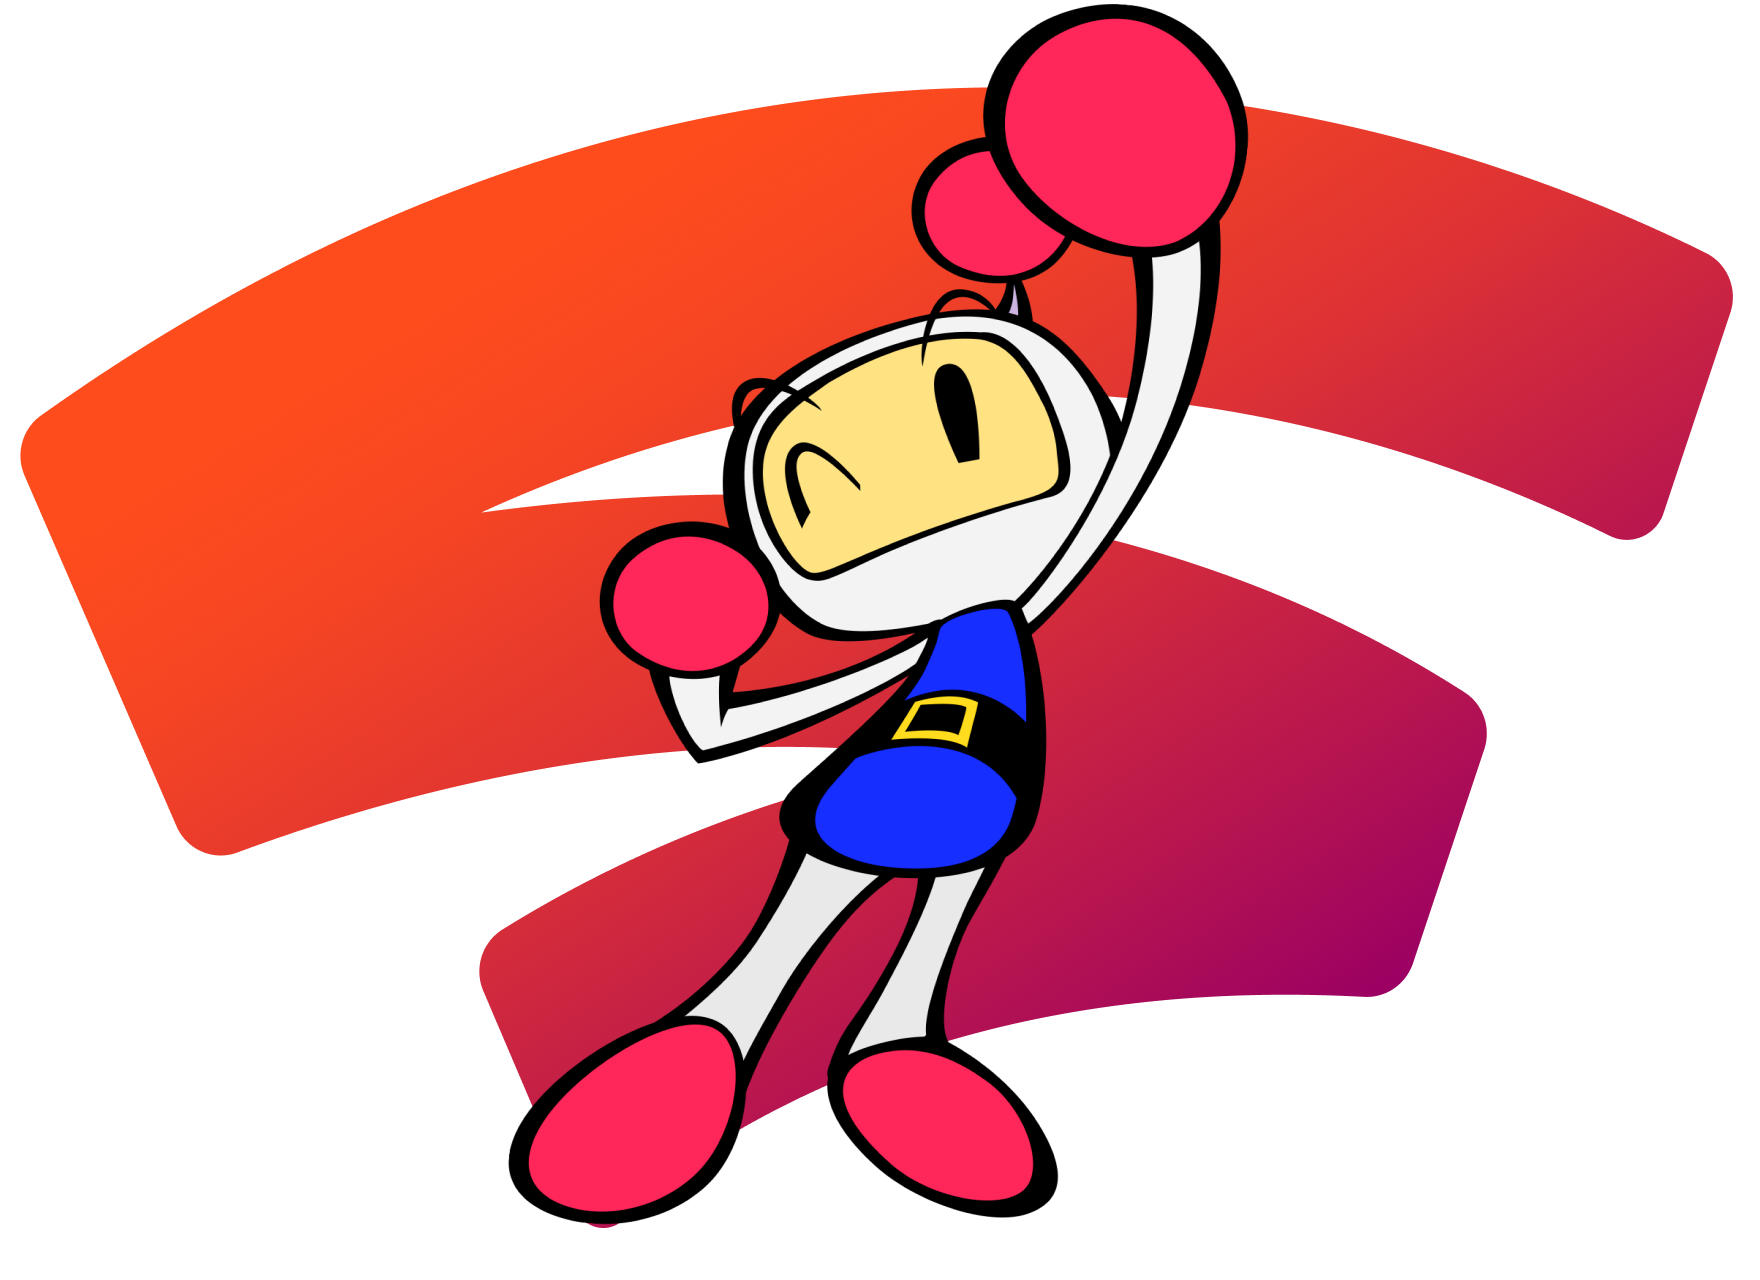 Super Bomberman R Online will be shutting down this year, but the